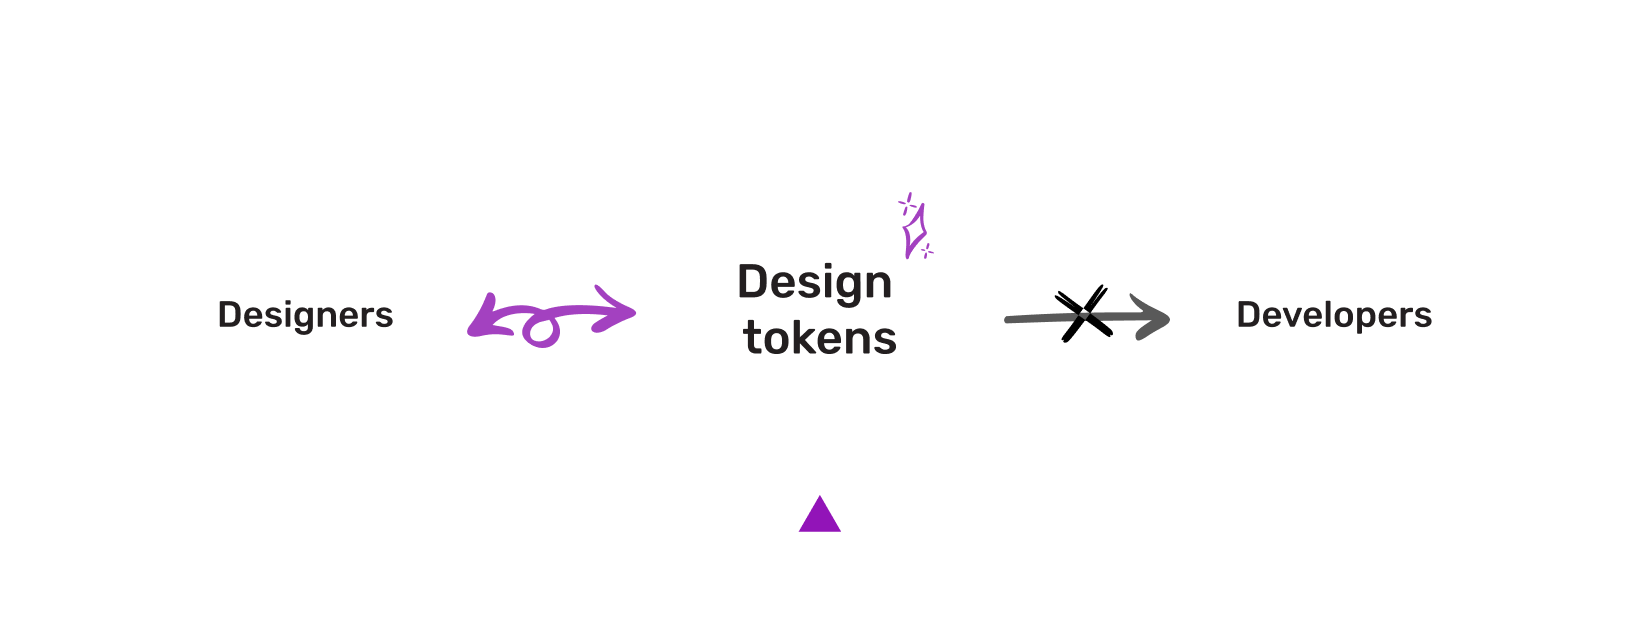 Schema: design tokens in the middle, linked bidirectionnaly to designers on the left, but a crossed out arrow toward developers on the right